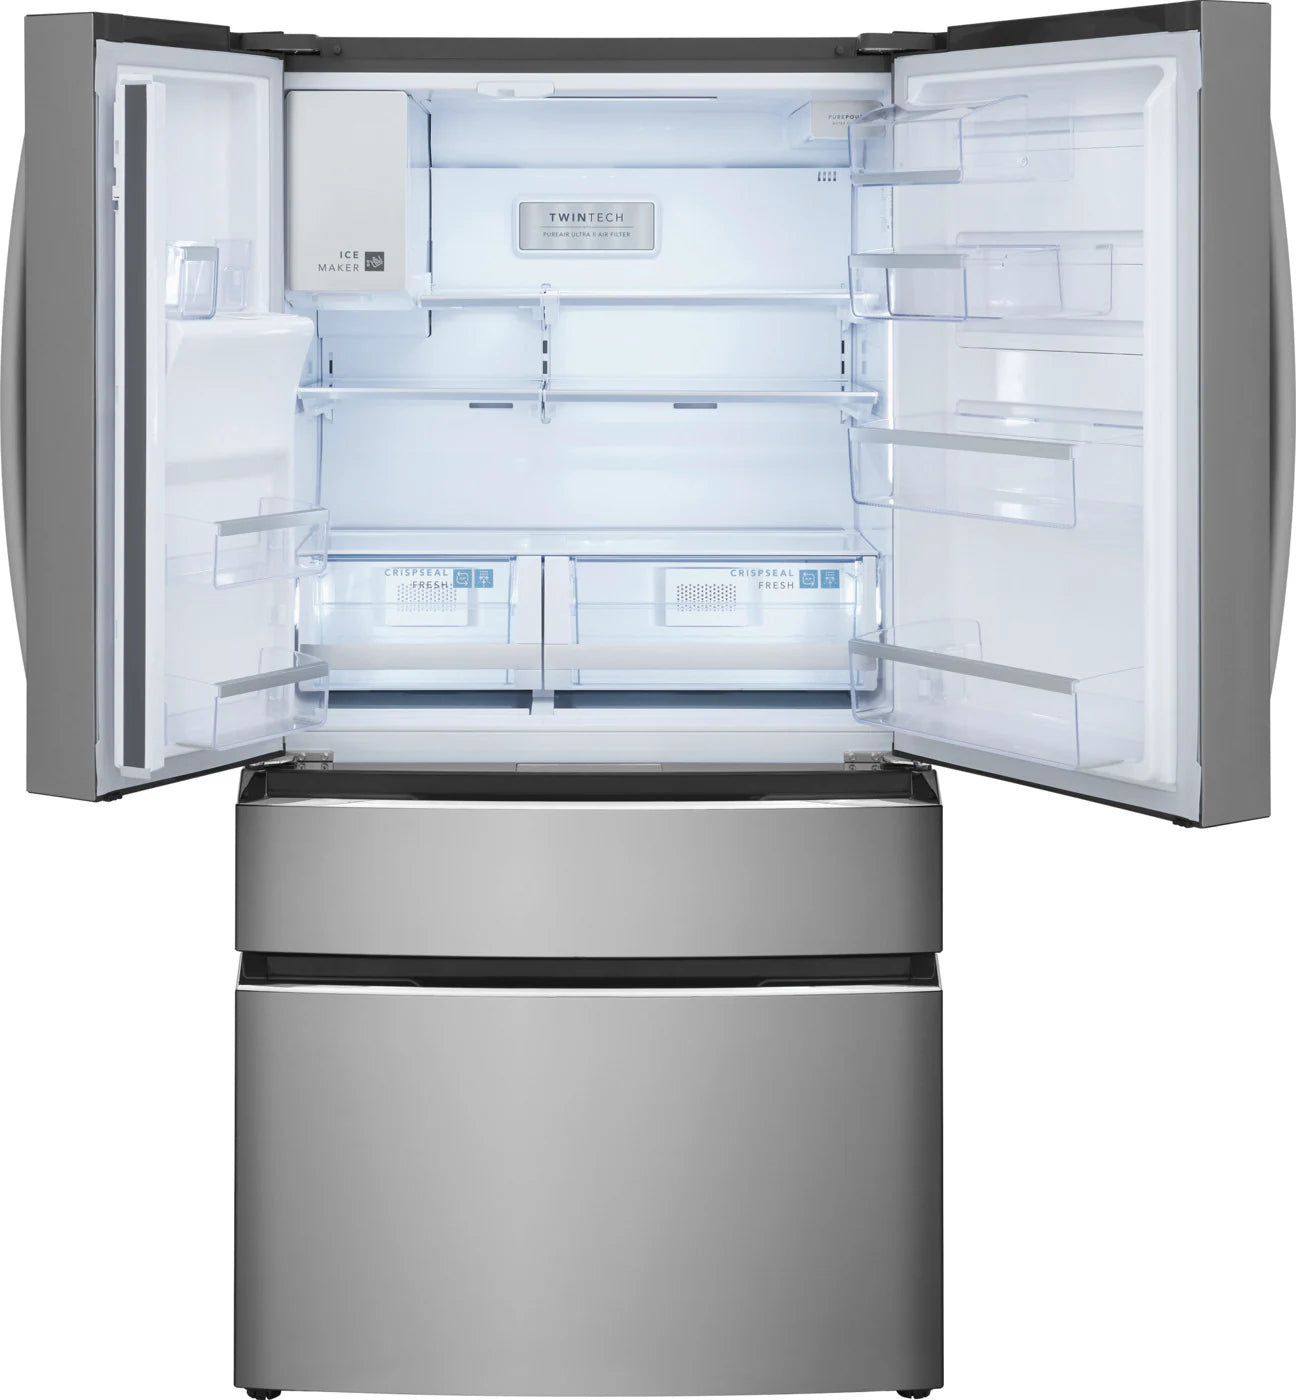 Frigidaire Gallery - 35.7 Inch 26.3 cu. ft Built In / Integrated Refrigerator in Stainless - GRMS2773AF